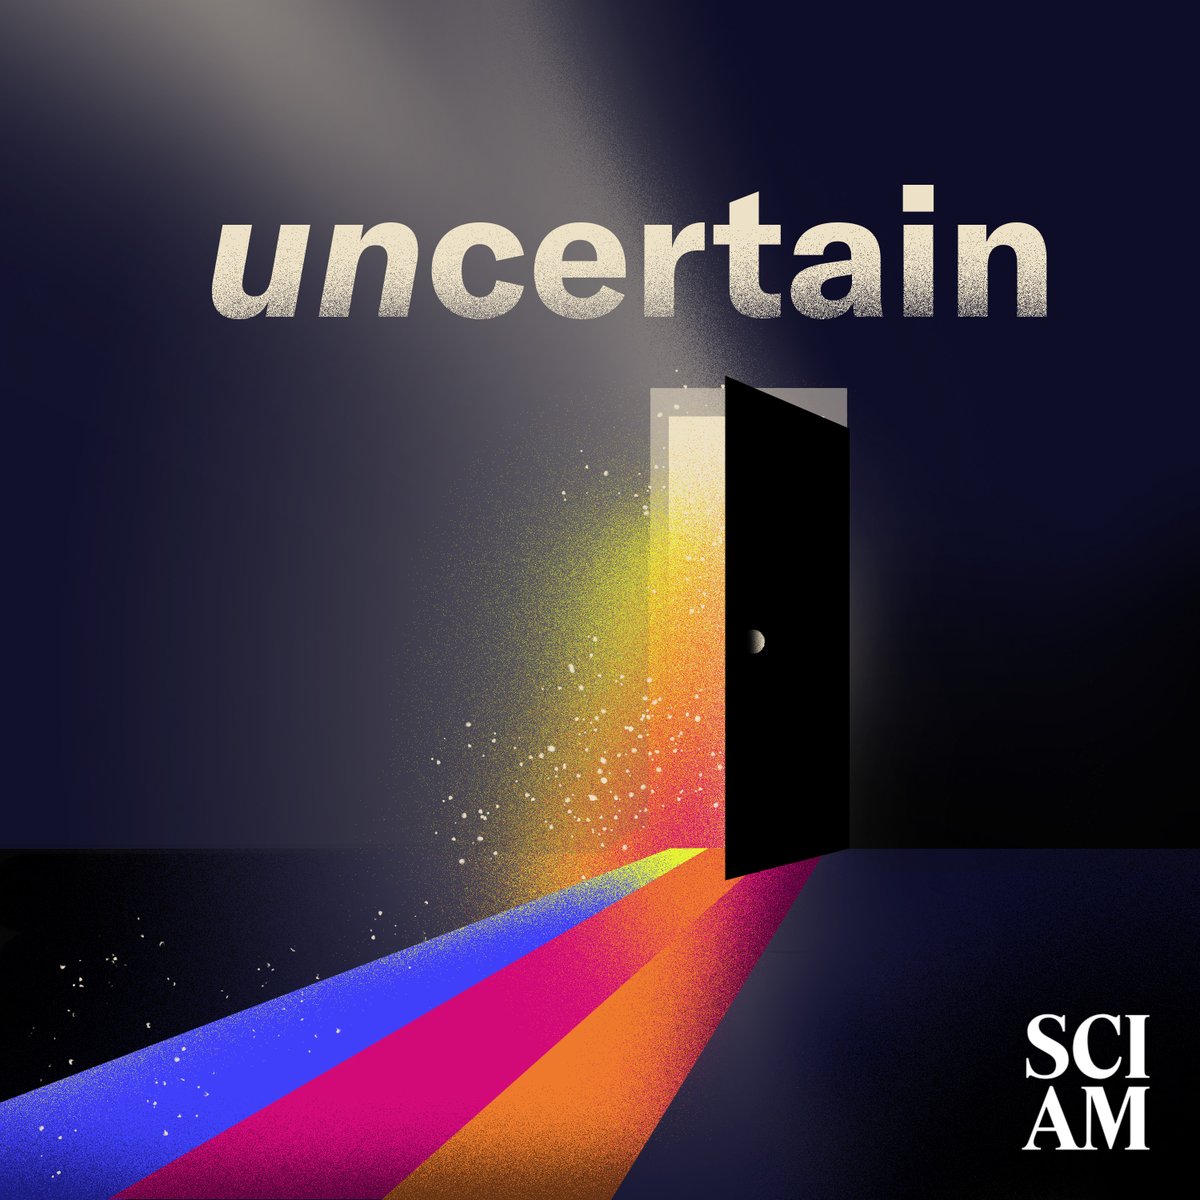 Embracing the unknown can be frightening. But for scientists, it’s the starting point for exploration. 🎧 Listen to the first episode of Uncertain with host @cragcrest 🔗 bit.ly/4aITbe9 This series was made with support from @GreaterGoodSC and @templeton_fdn.